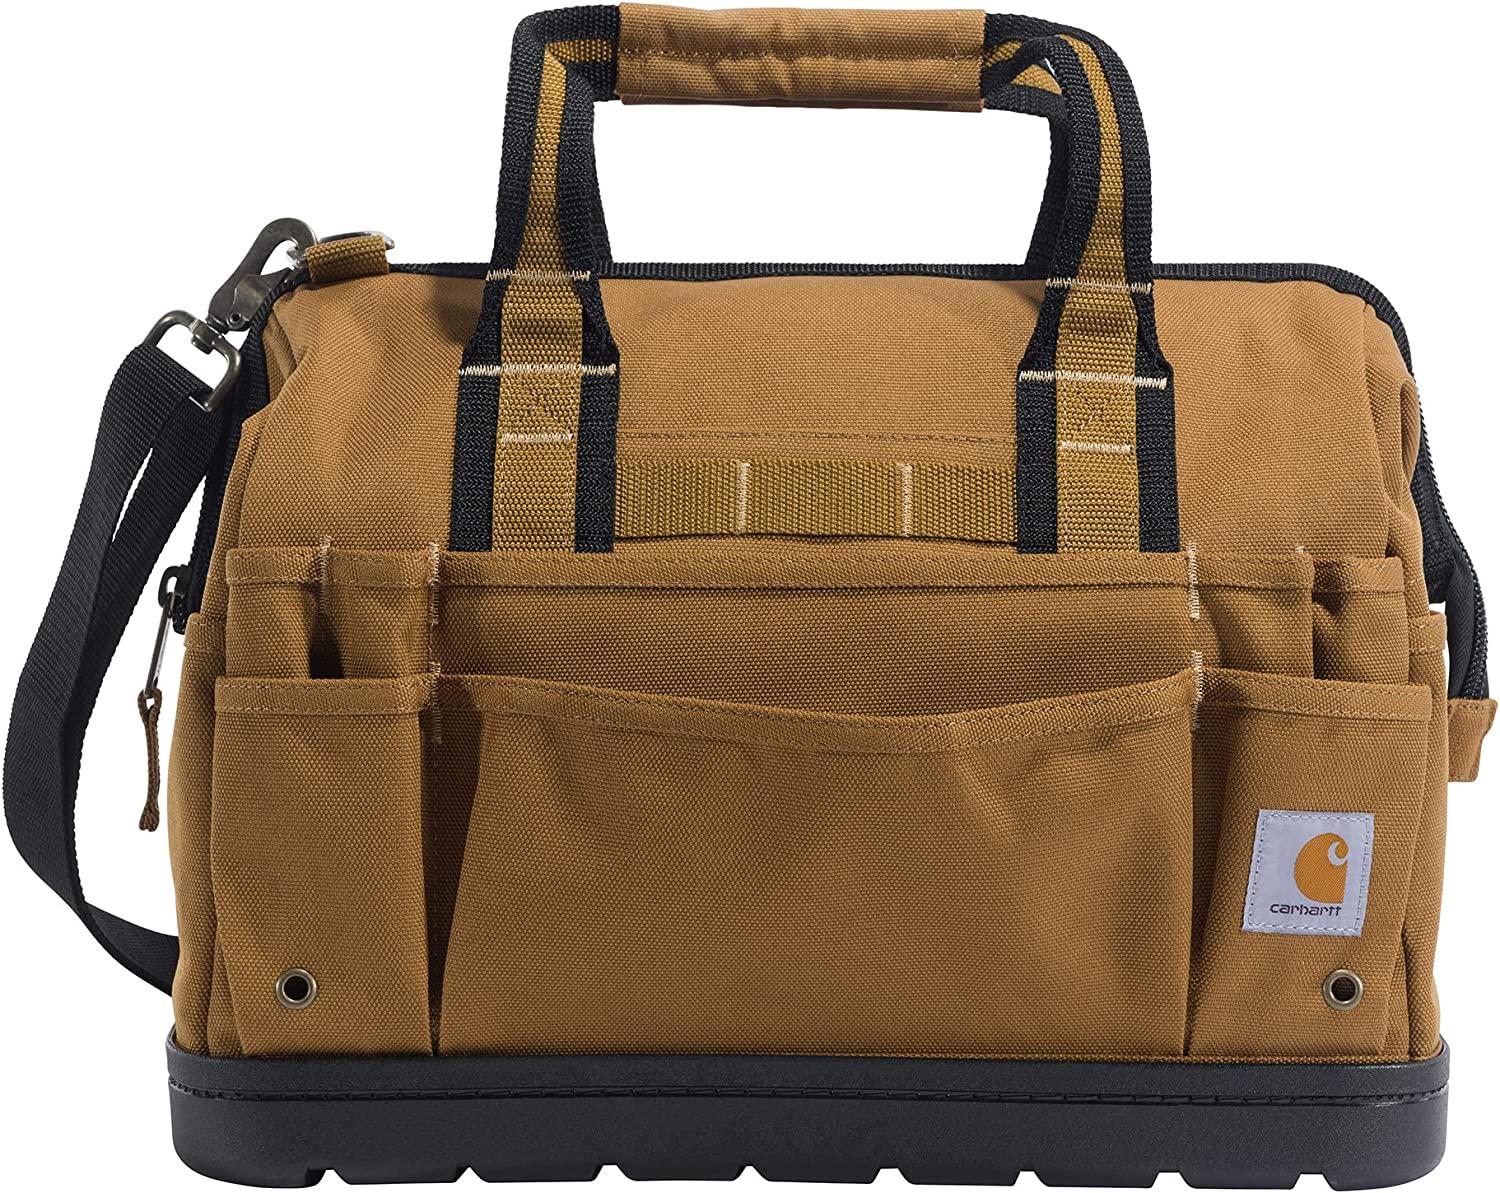 Carhartt Legacy Tool Bag with Molded Base for $57.92 Shipped